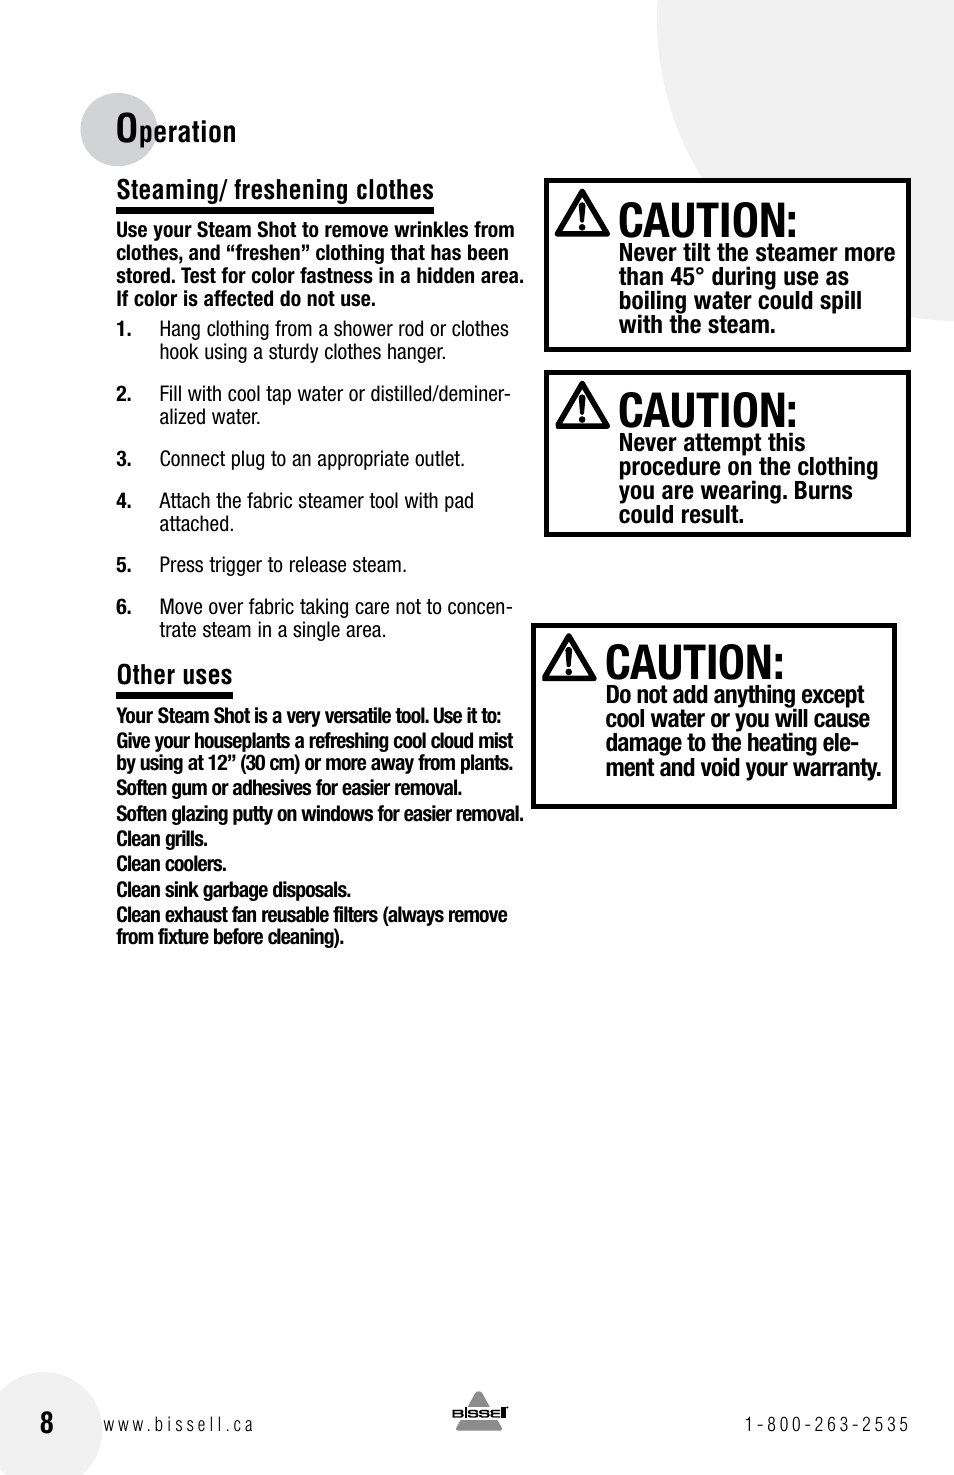 Caution | Bissell STEAM SHOT 39N7 User Manual | Page 8 / 12